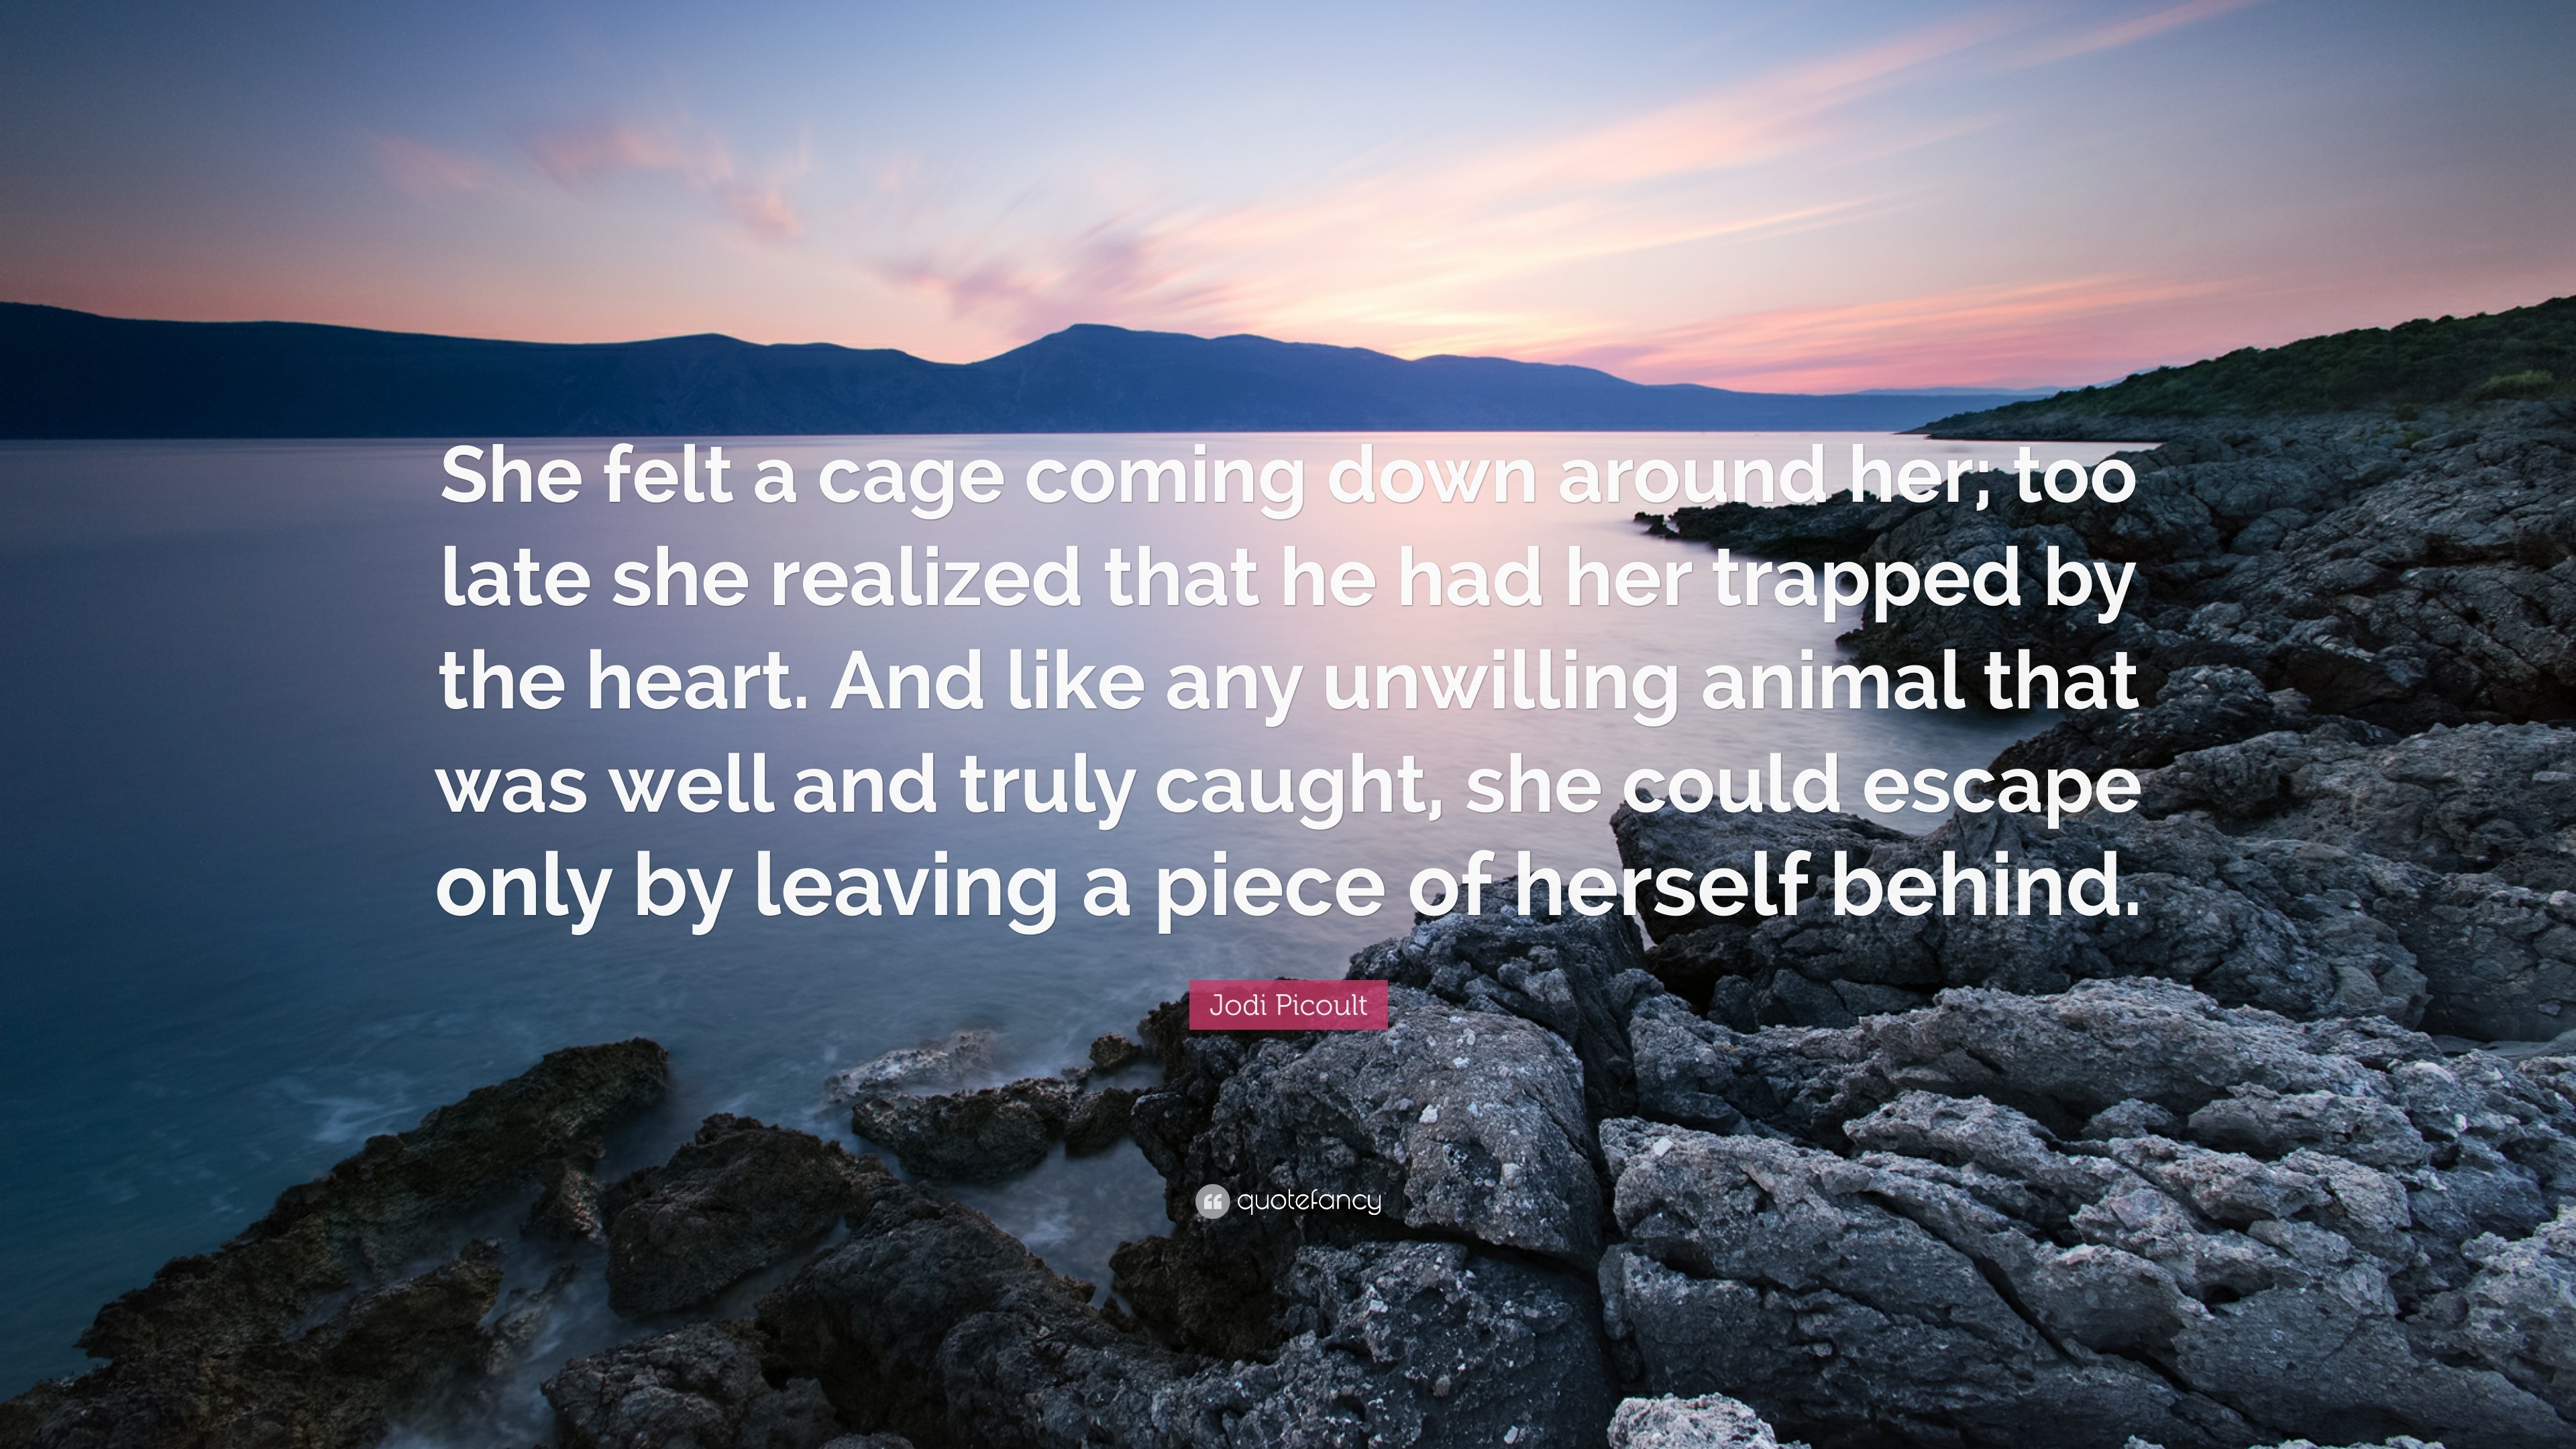 Jodi Picoult Quote: “She felt a cage coming down around her; too late ...